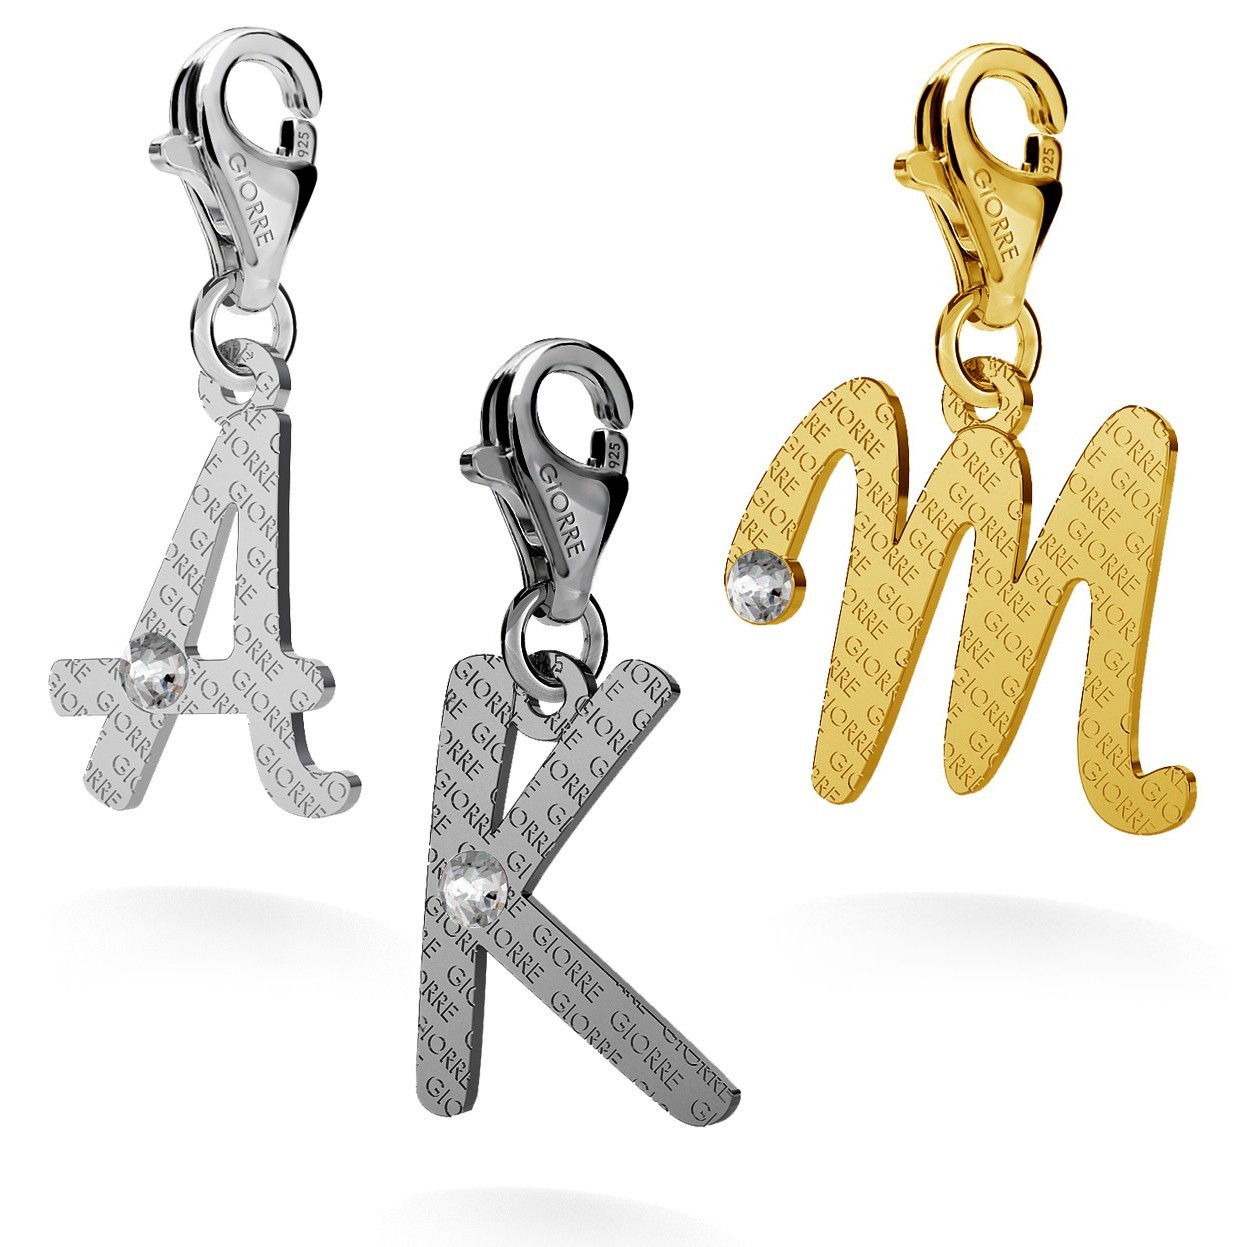 CHARM 28, LETTERS A - V, SILVER 925, RHODIUM OR GOLD PLATED